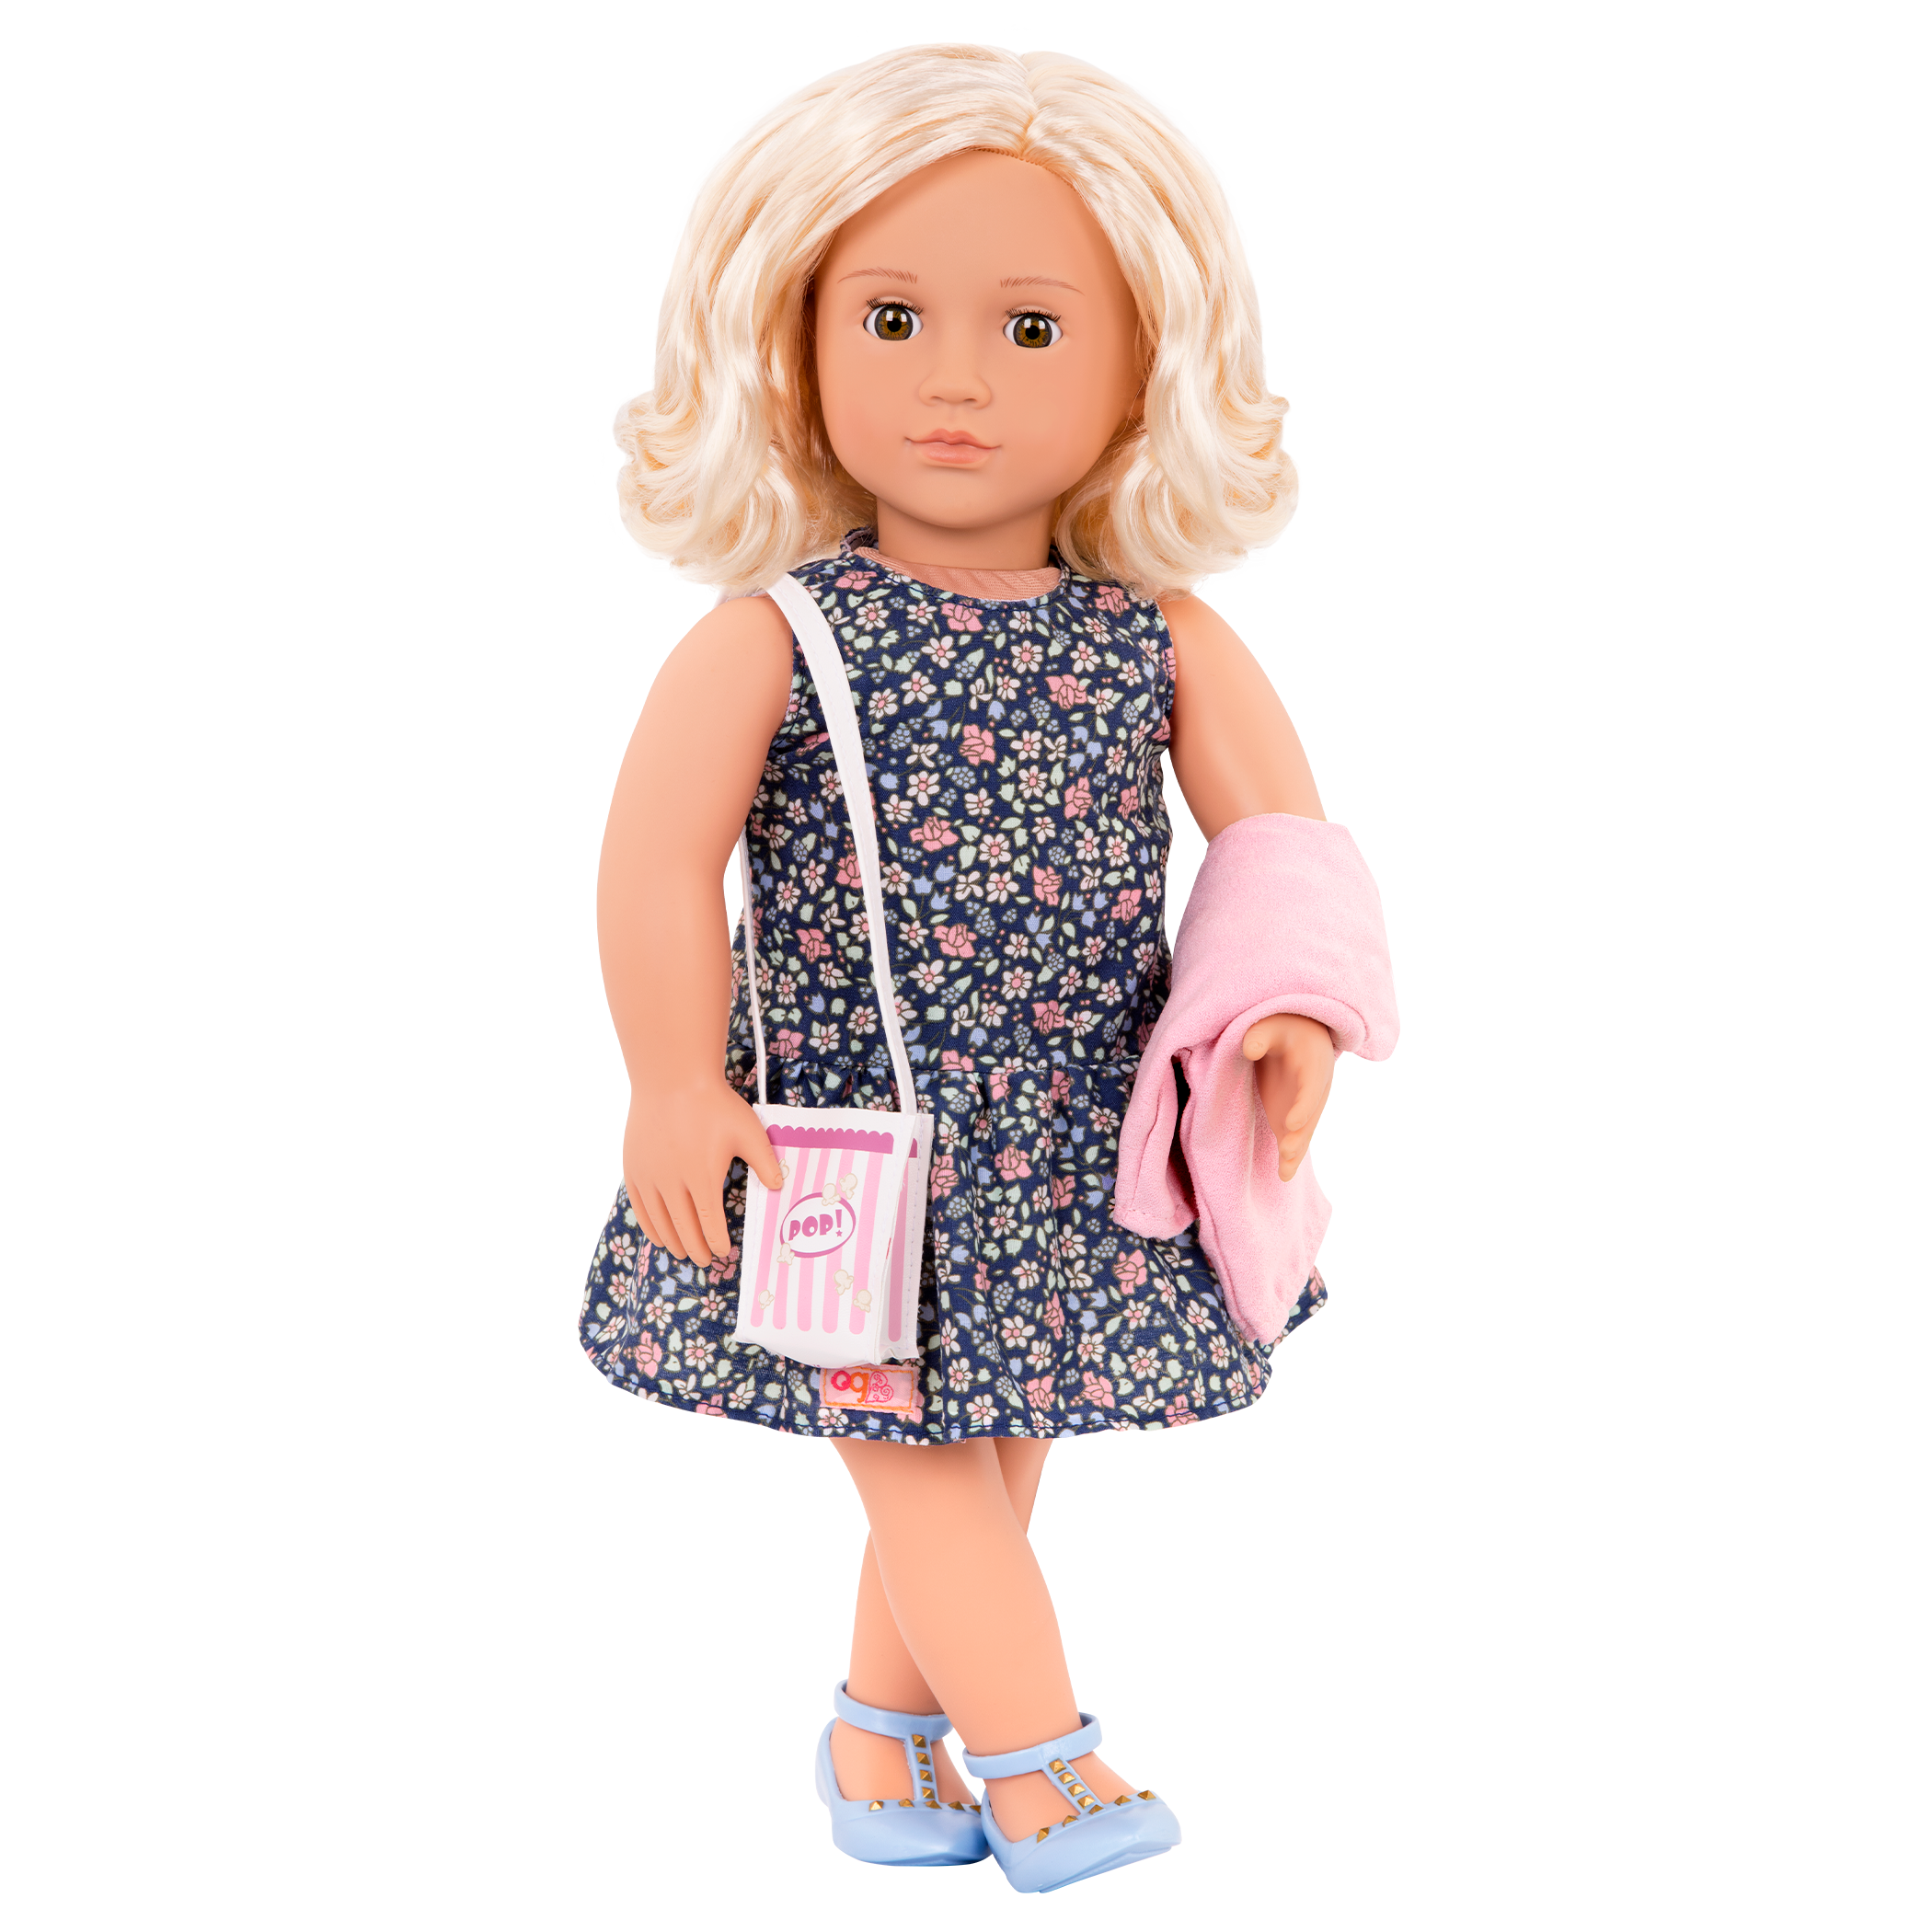 Popcorn Pizazz - 18-inch Doll Outfit with Ivory